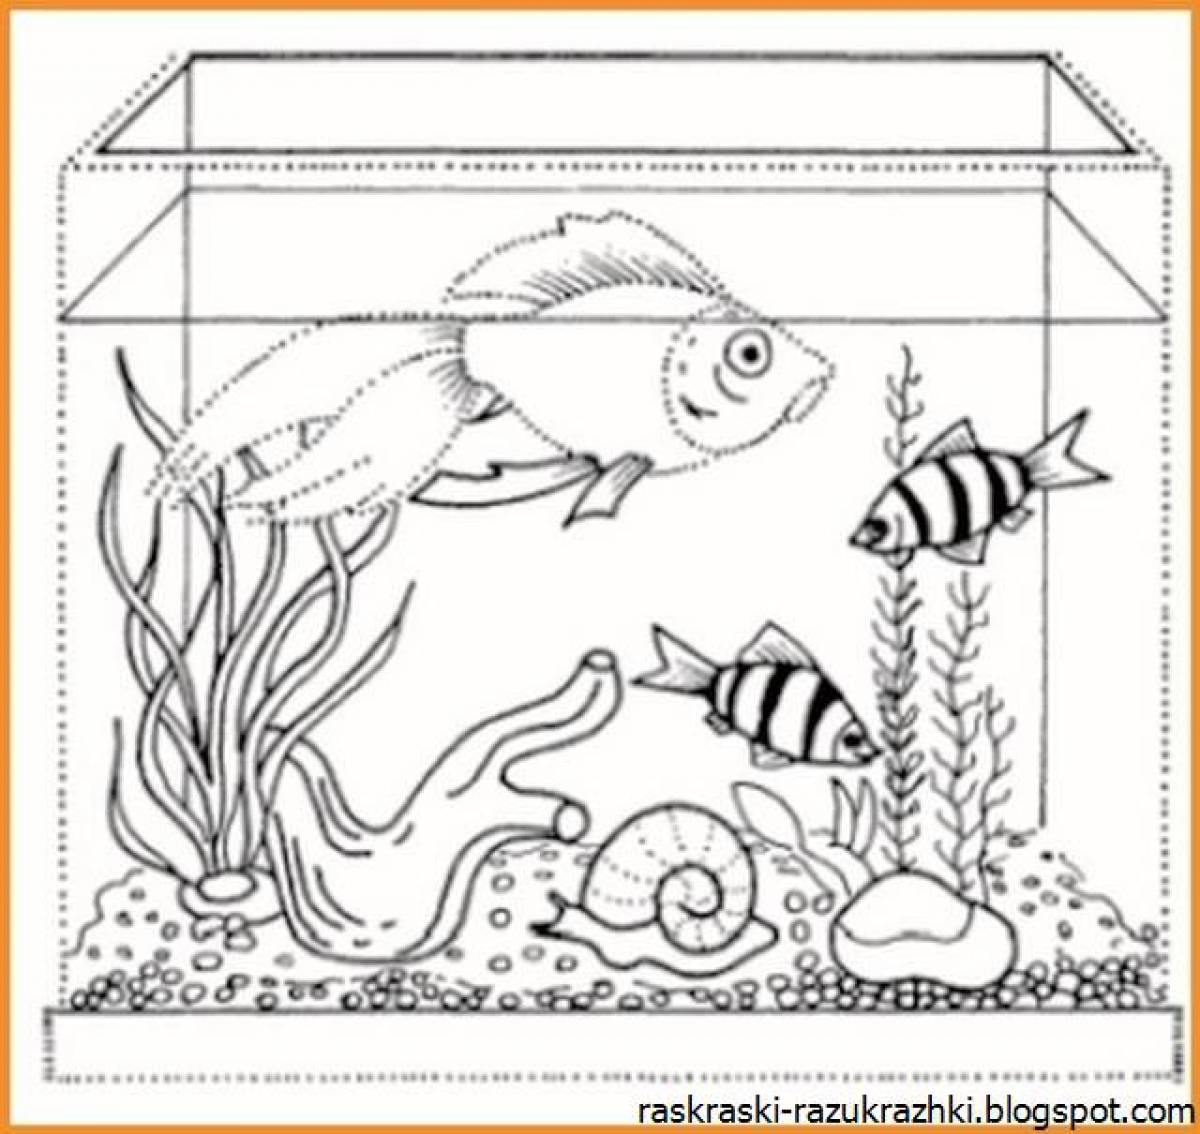 Fantastic fish tank coloring page for kids